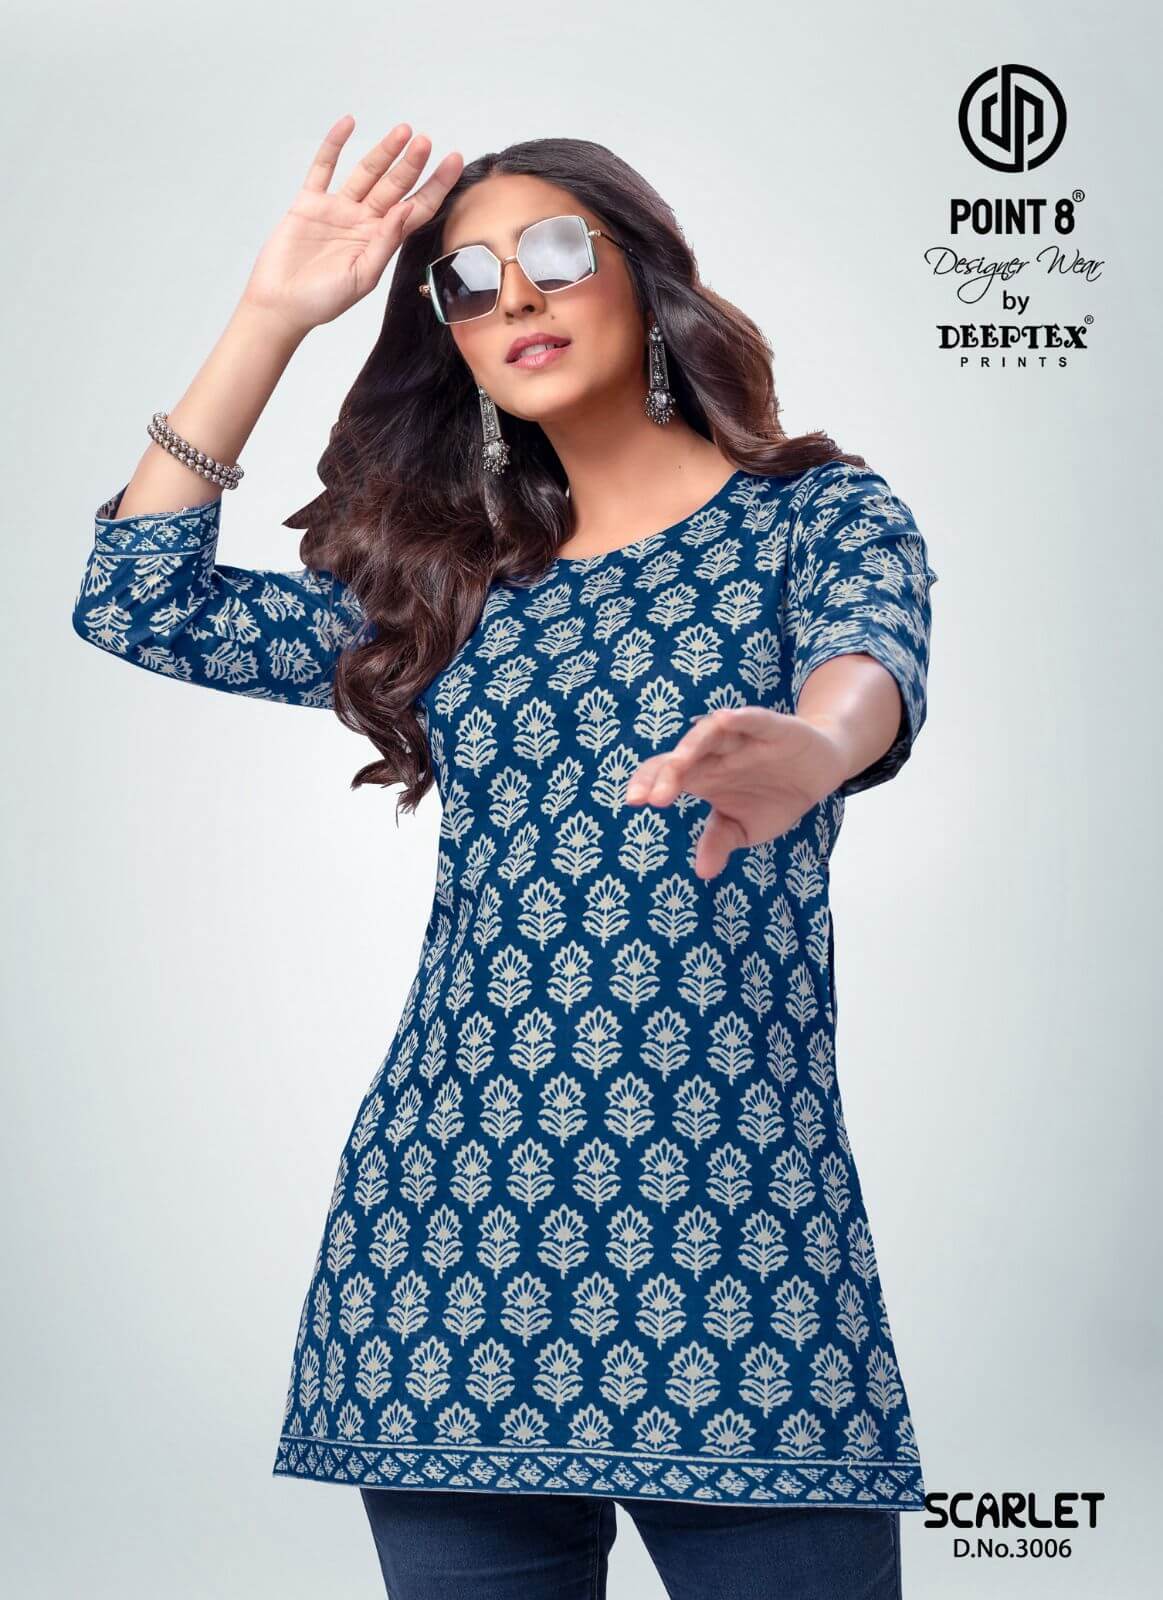 Deeptex Point 8 Scarlet Vol 3 Ladies Top Catalog collection 3